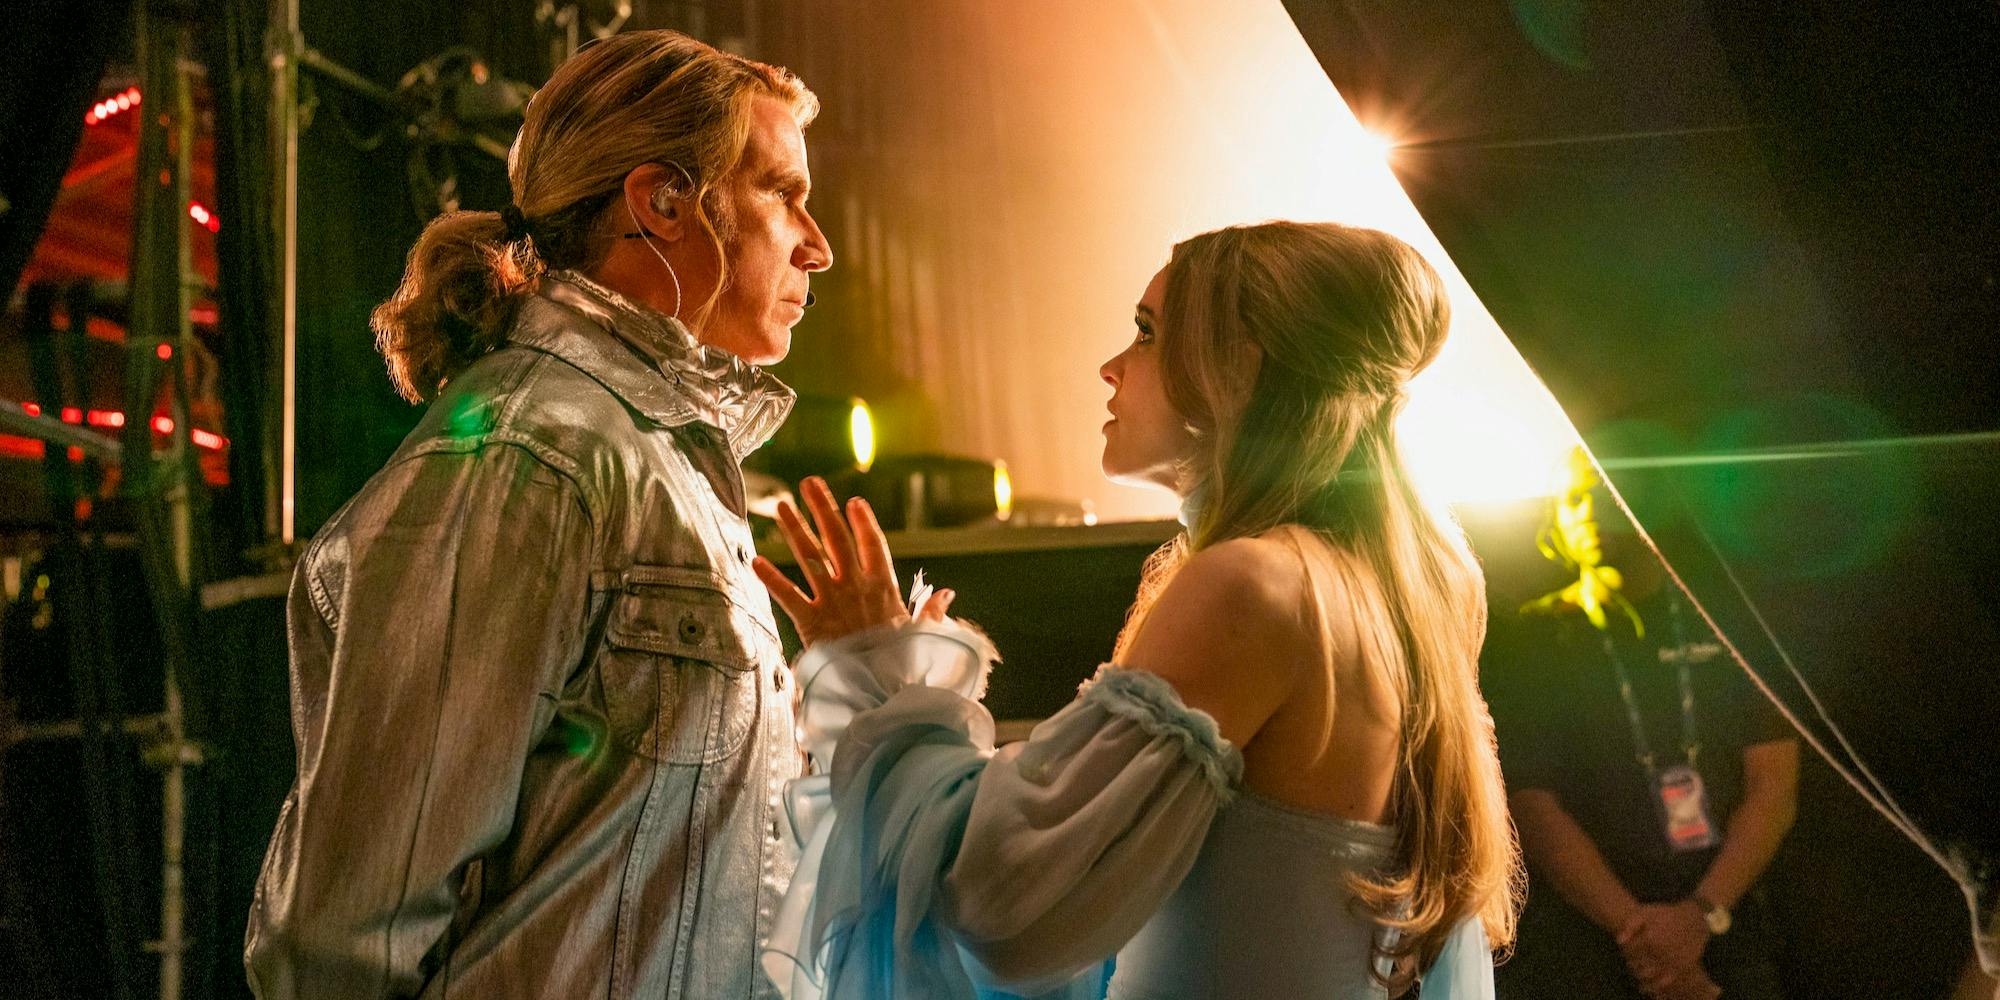 Will Ferrell and Rachel McAdams in Eurovision Song Contest: The Story of Fire Saga, one of the best new musicals on Netflix in 2020.